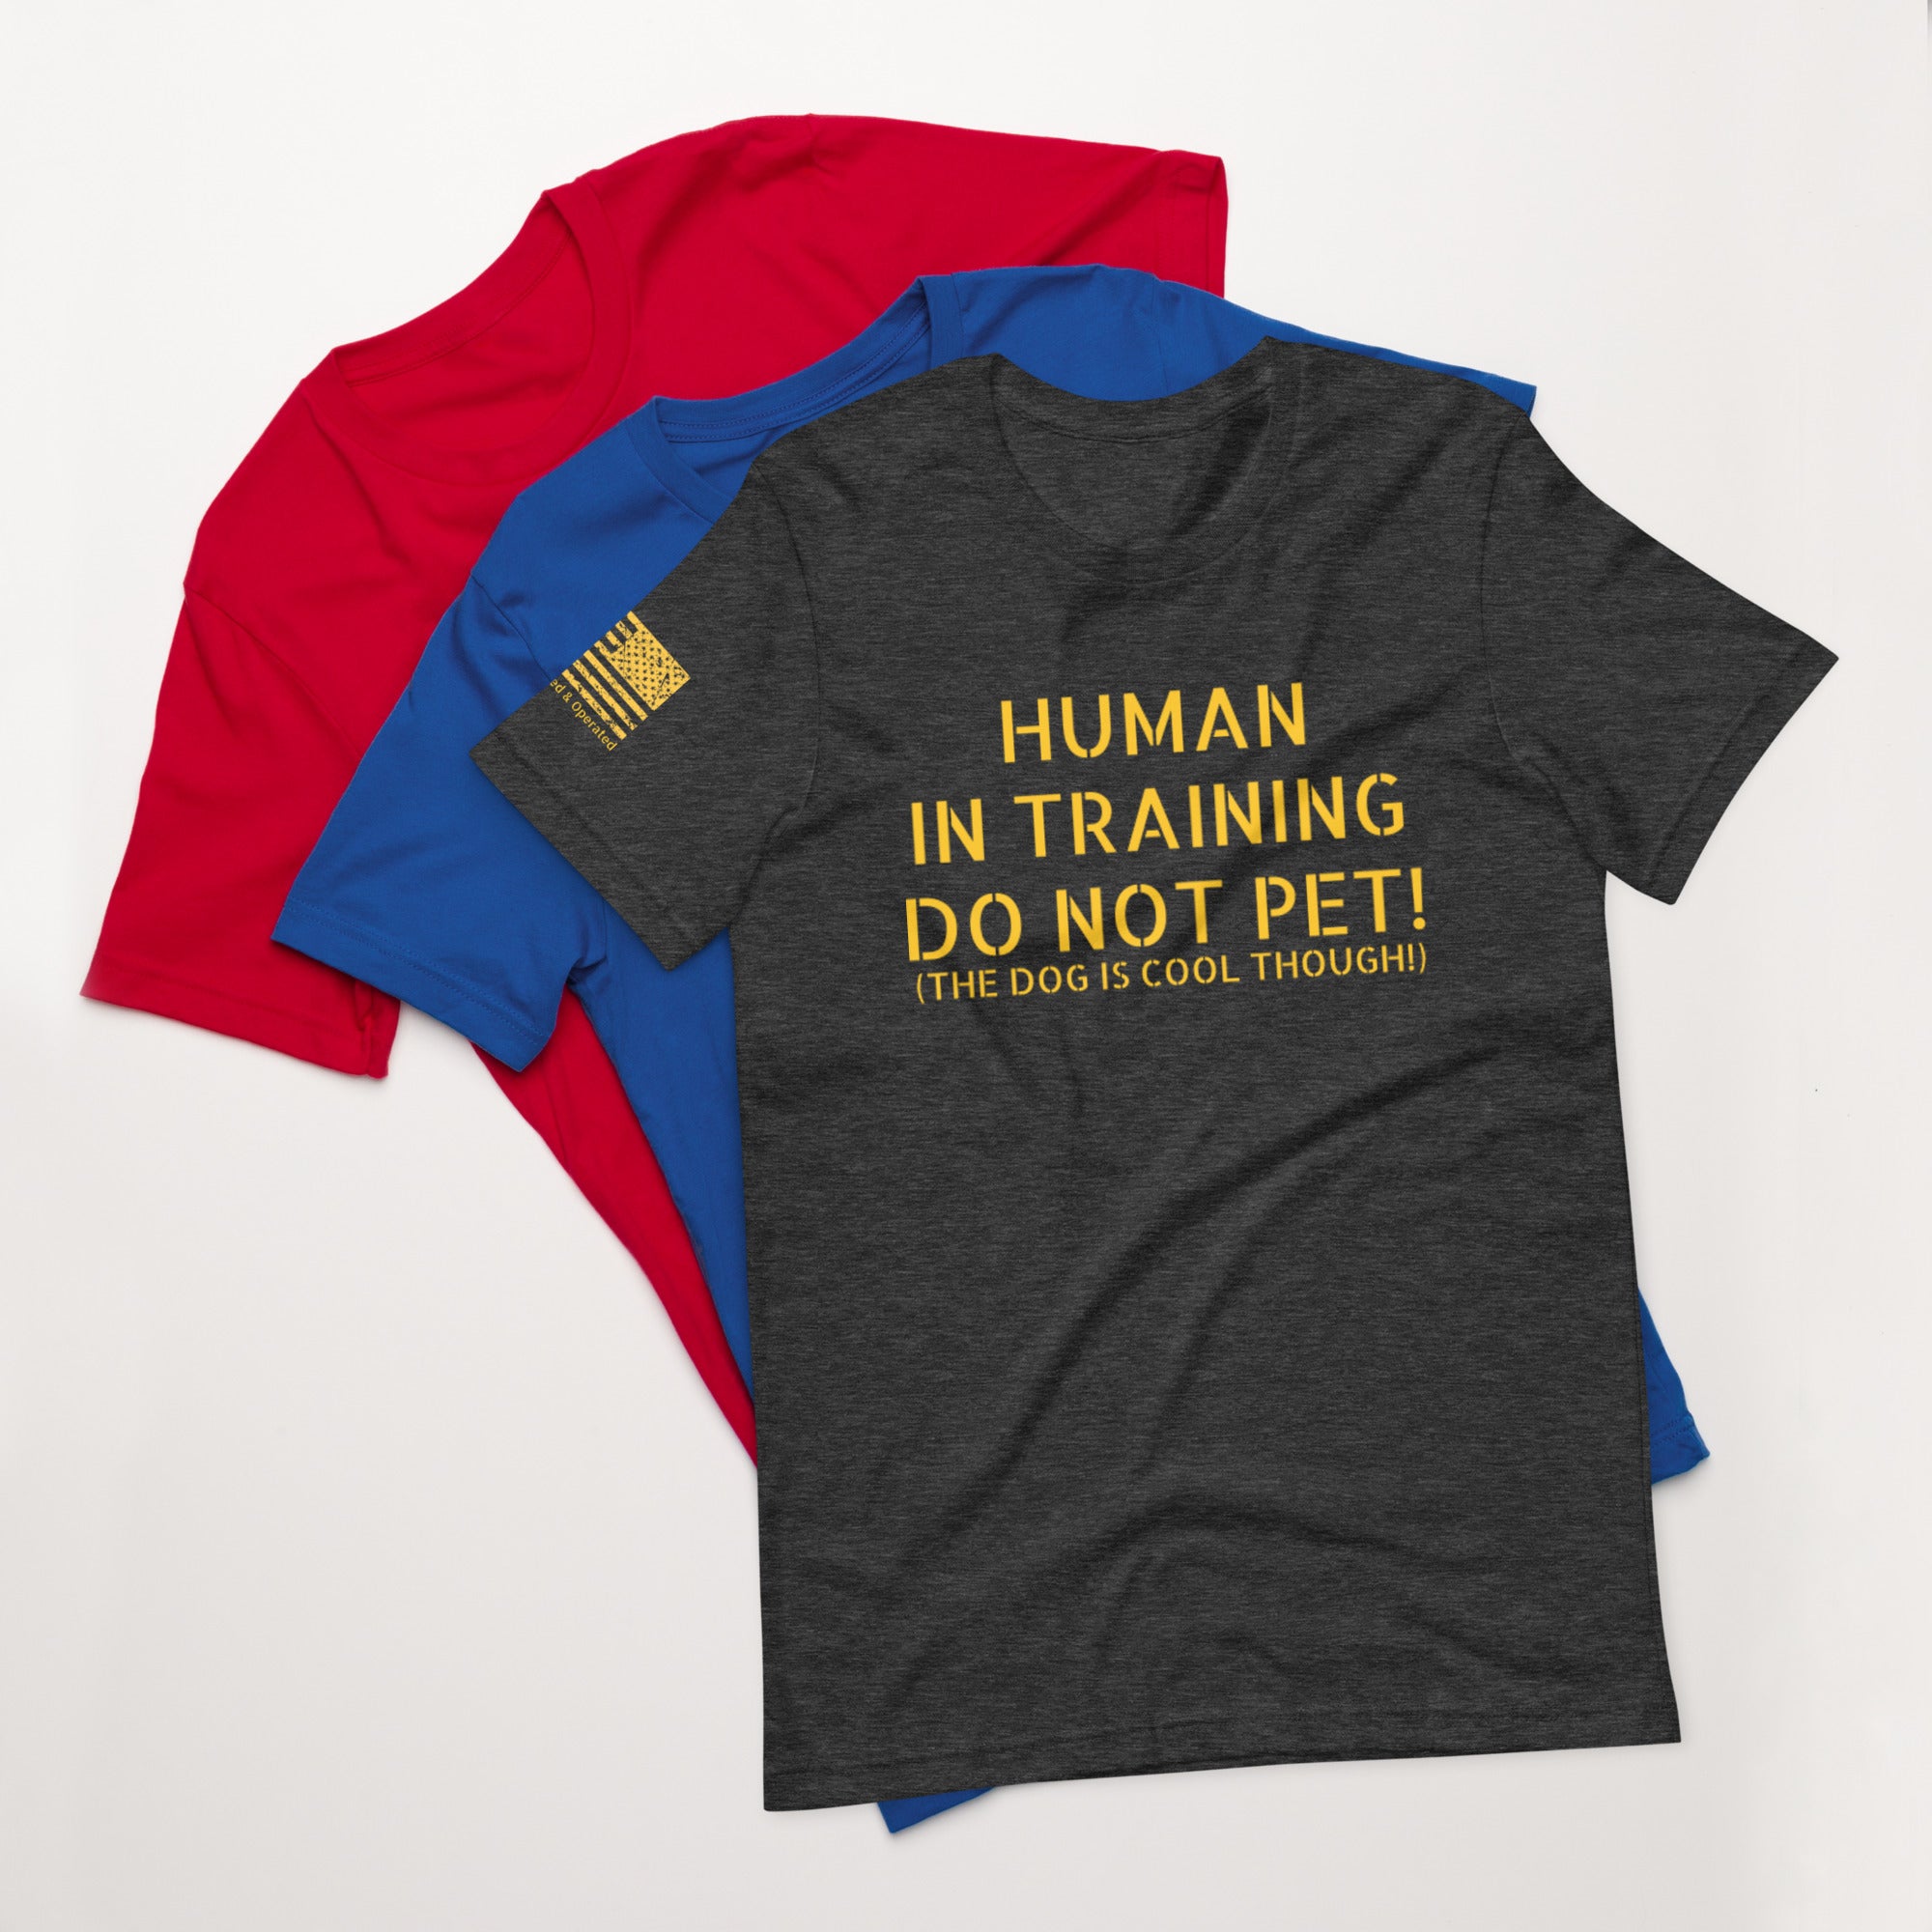 Unisex t-shirt HUMAN IN TRAINING DO NOT PET! (BUT THE DOG IS COOL)